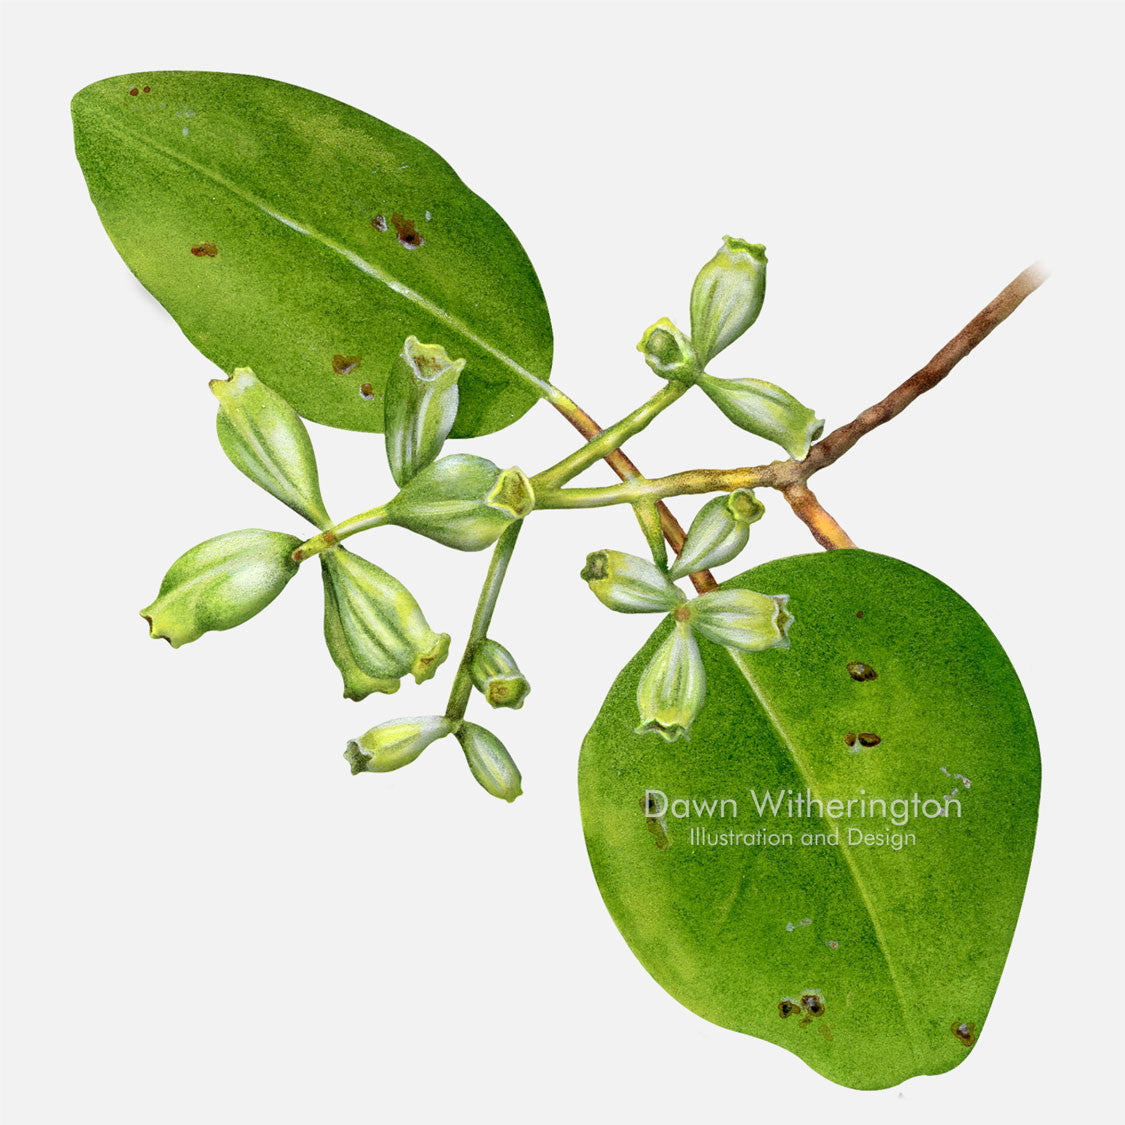 This beautiful illustration of white mangrove, Laguncularia racemosa, is botanically accurate in detail.